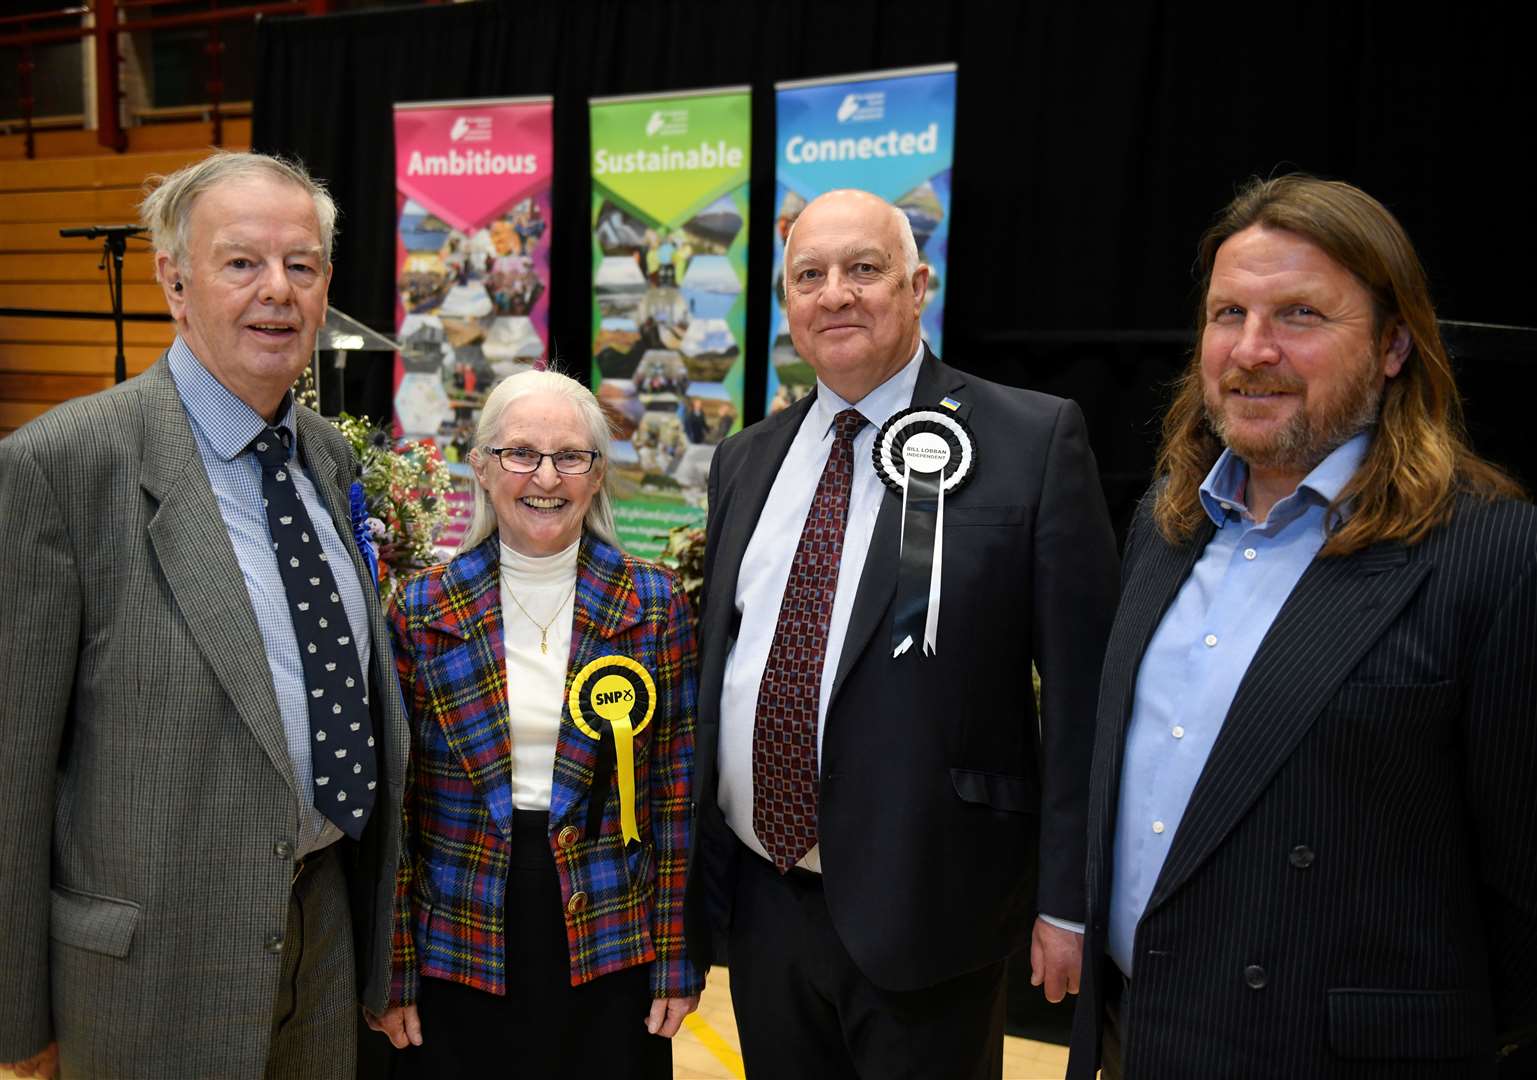 Councillors by Ward: 20 Badenoch and Strathspey: John Bruce (Scottish Conservative and Unionist), Muriel Cockburn (Scottish National Party), Bill Lobban (Independent) and Russell Jones (Independent). Picture: James Mackenzie